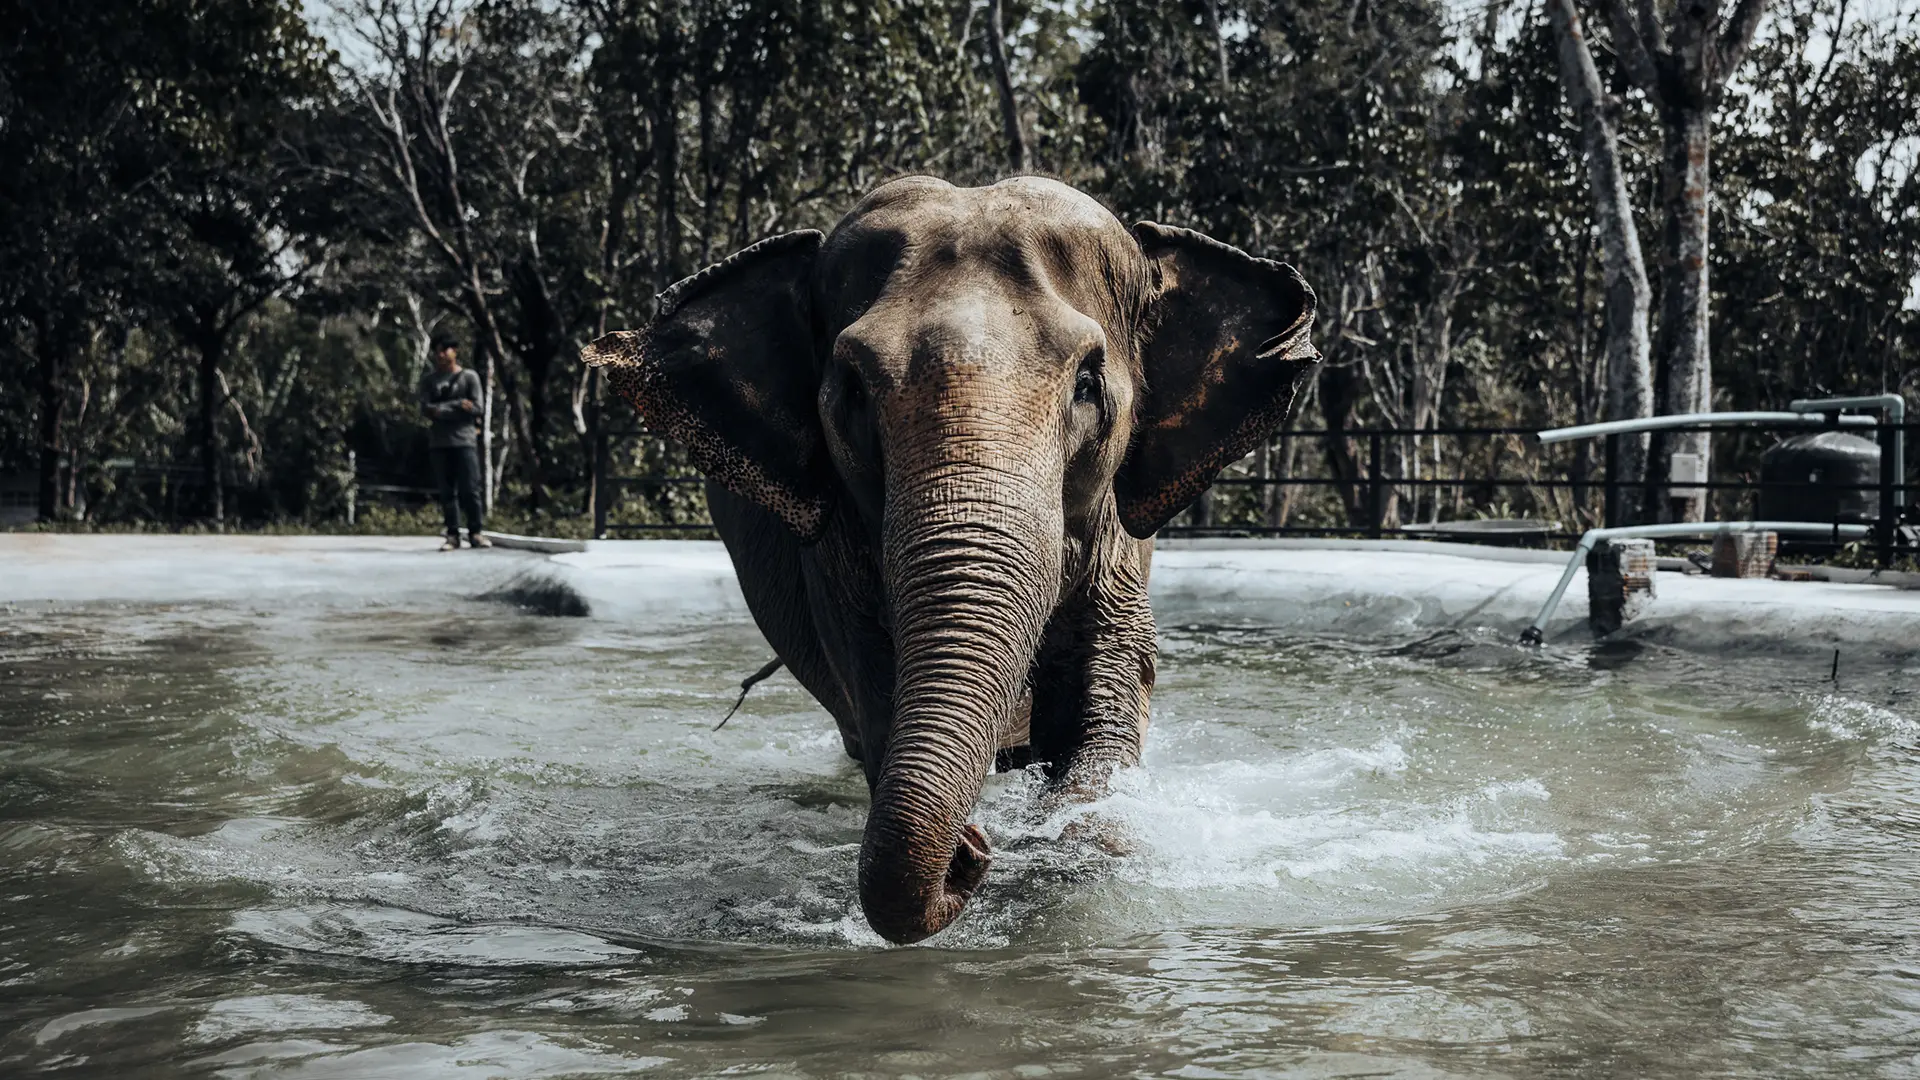 Elephant playing in water in Phuket